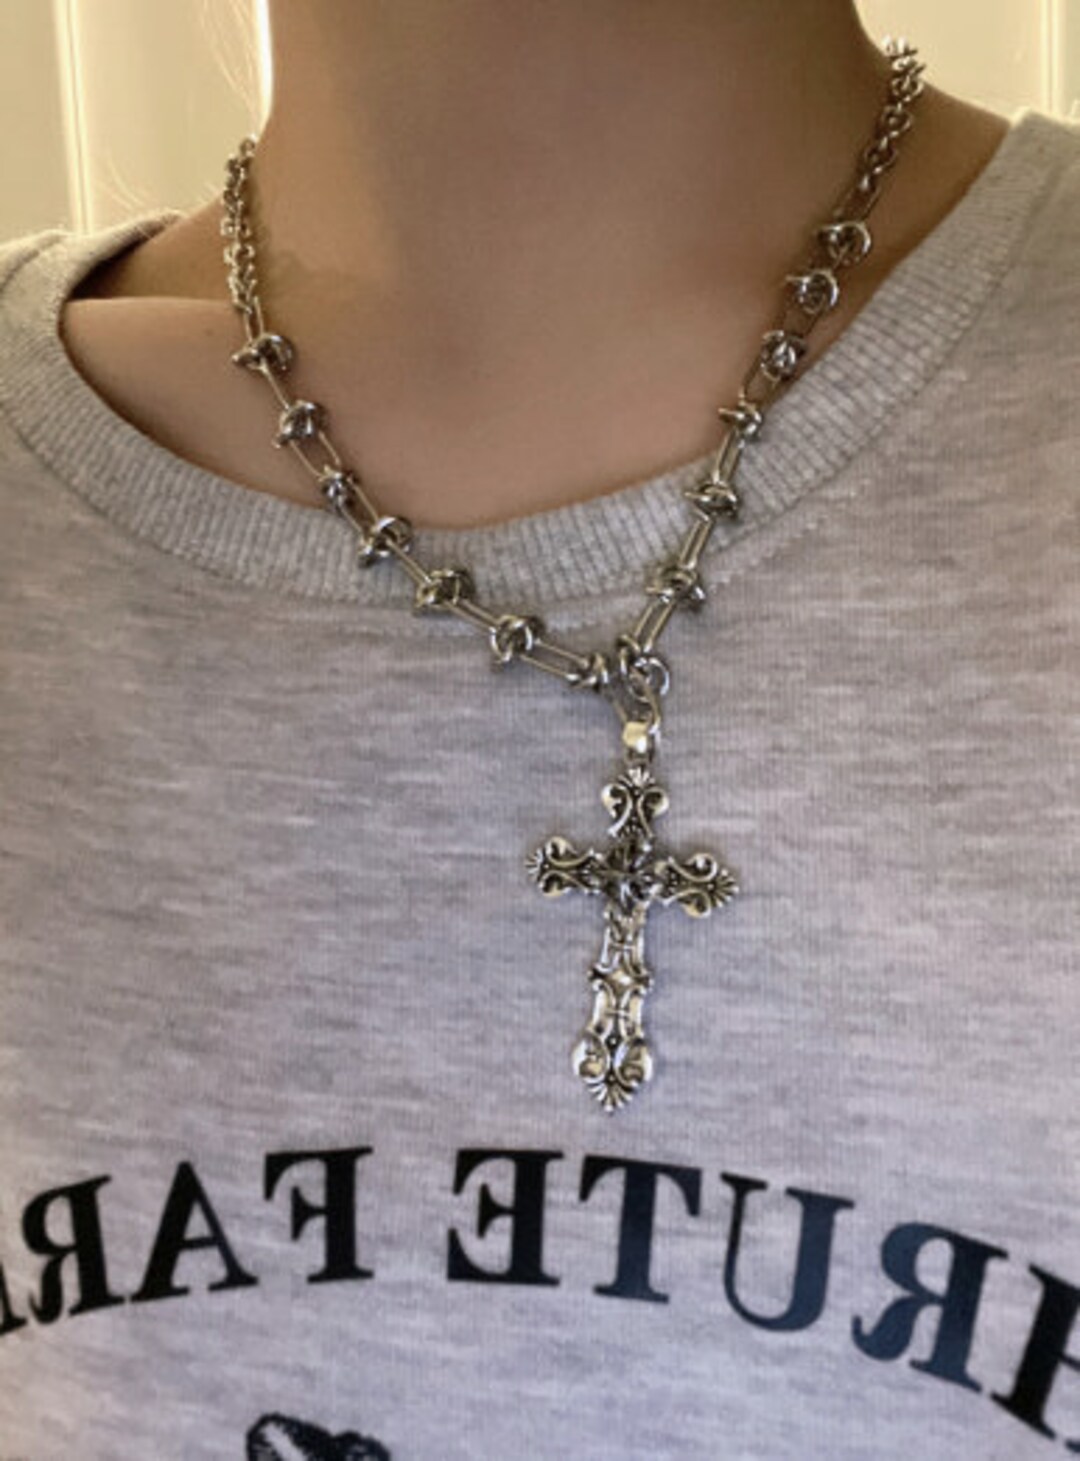 Intricately Cross Pendant and Necklace Y2k Style Chain Gifts for Her - Etsy